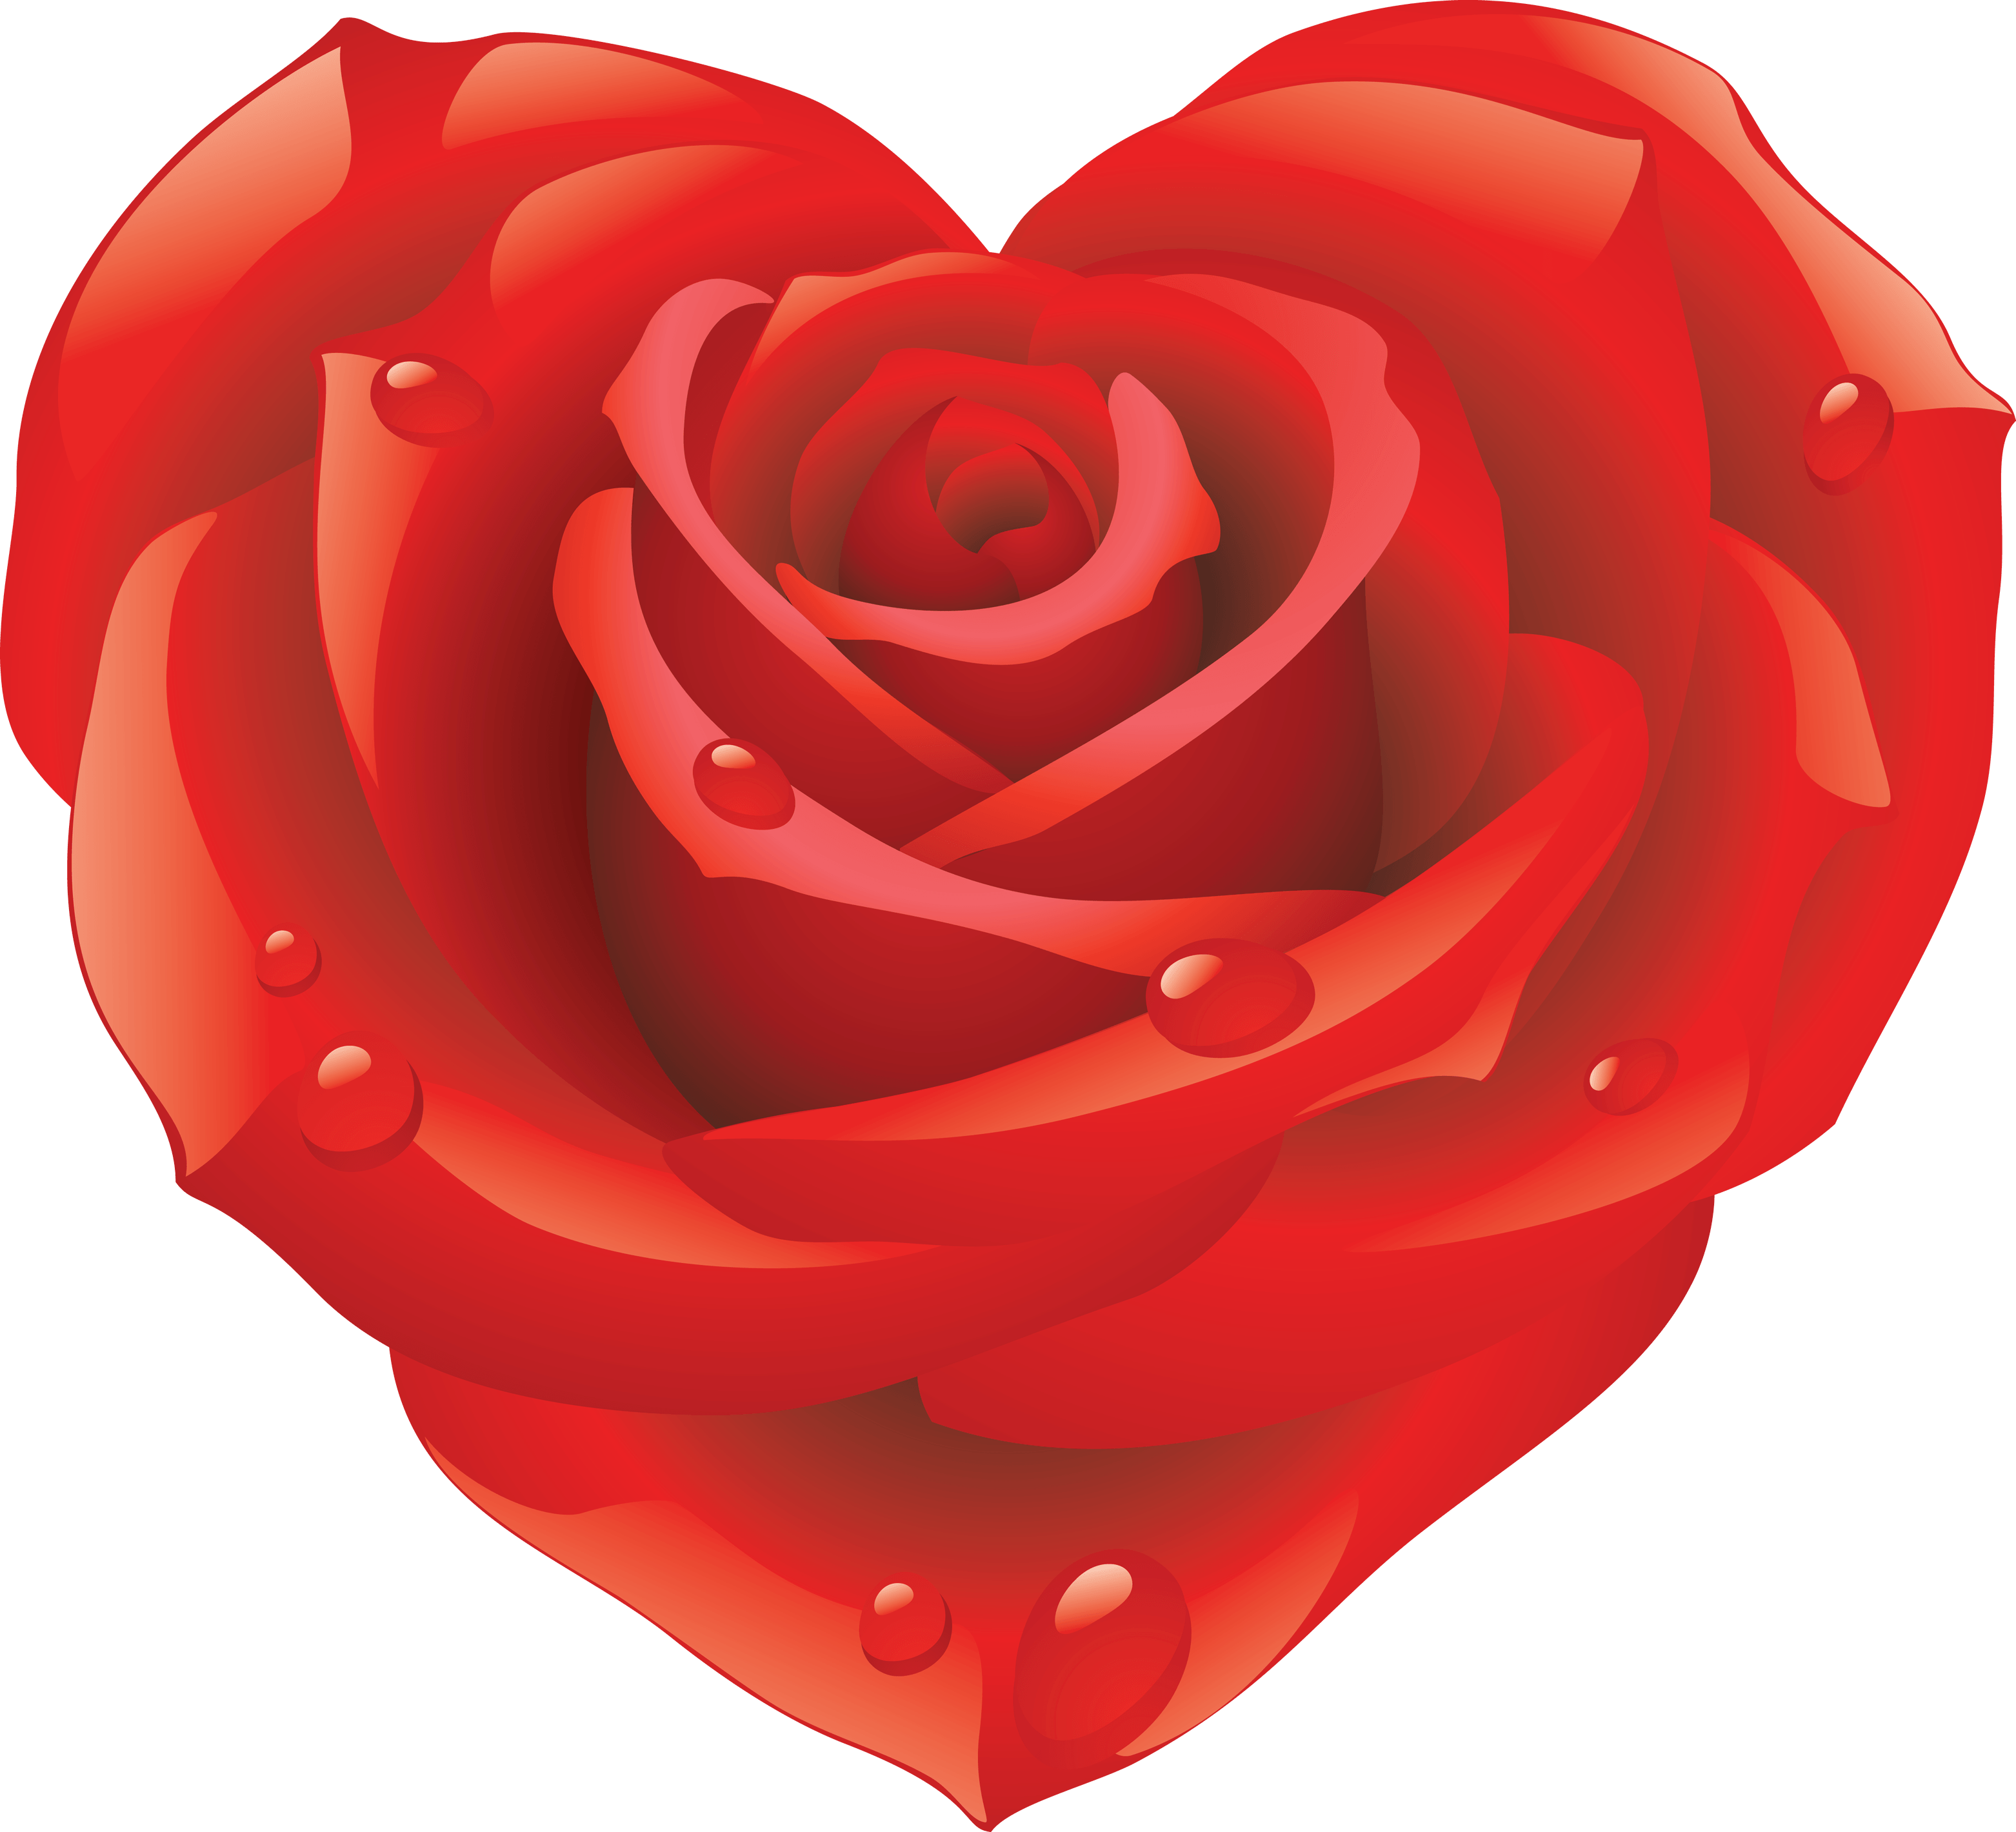 Rose Png Image Picture Download PNG Image